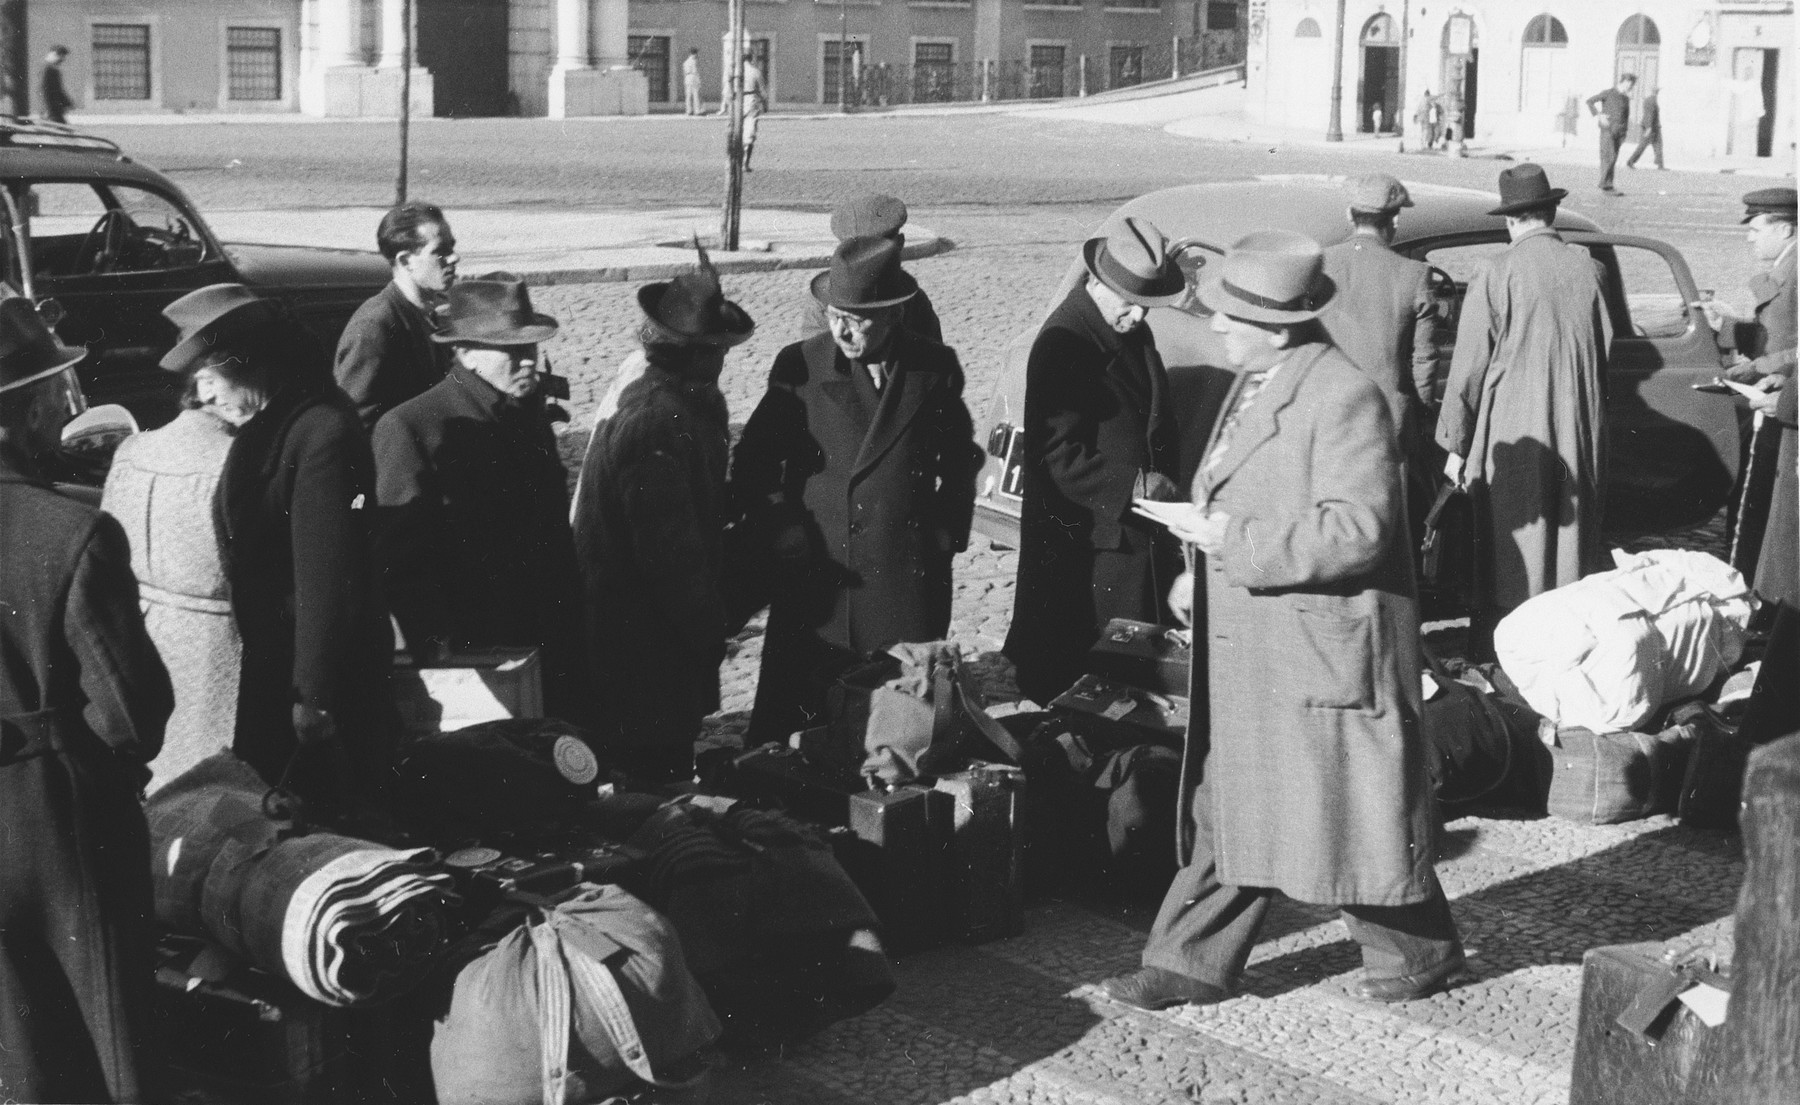 A group of Jewish refugees who have just arrived in Lisbon wait with their luggage in front of the St. Appolonia train station.